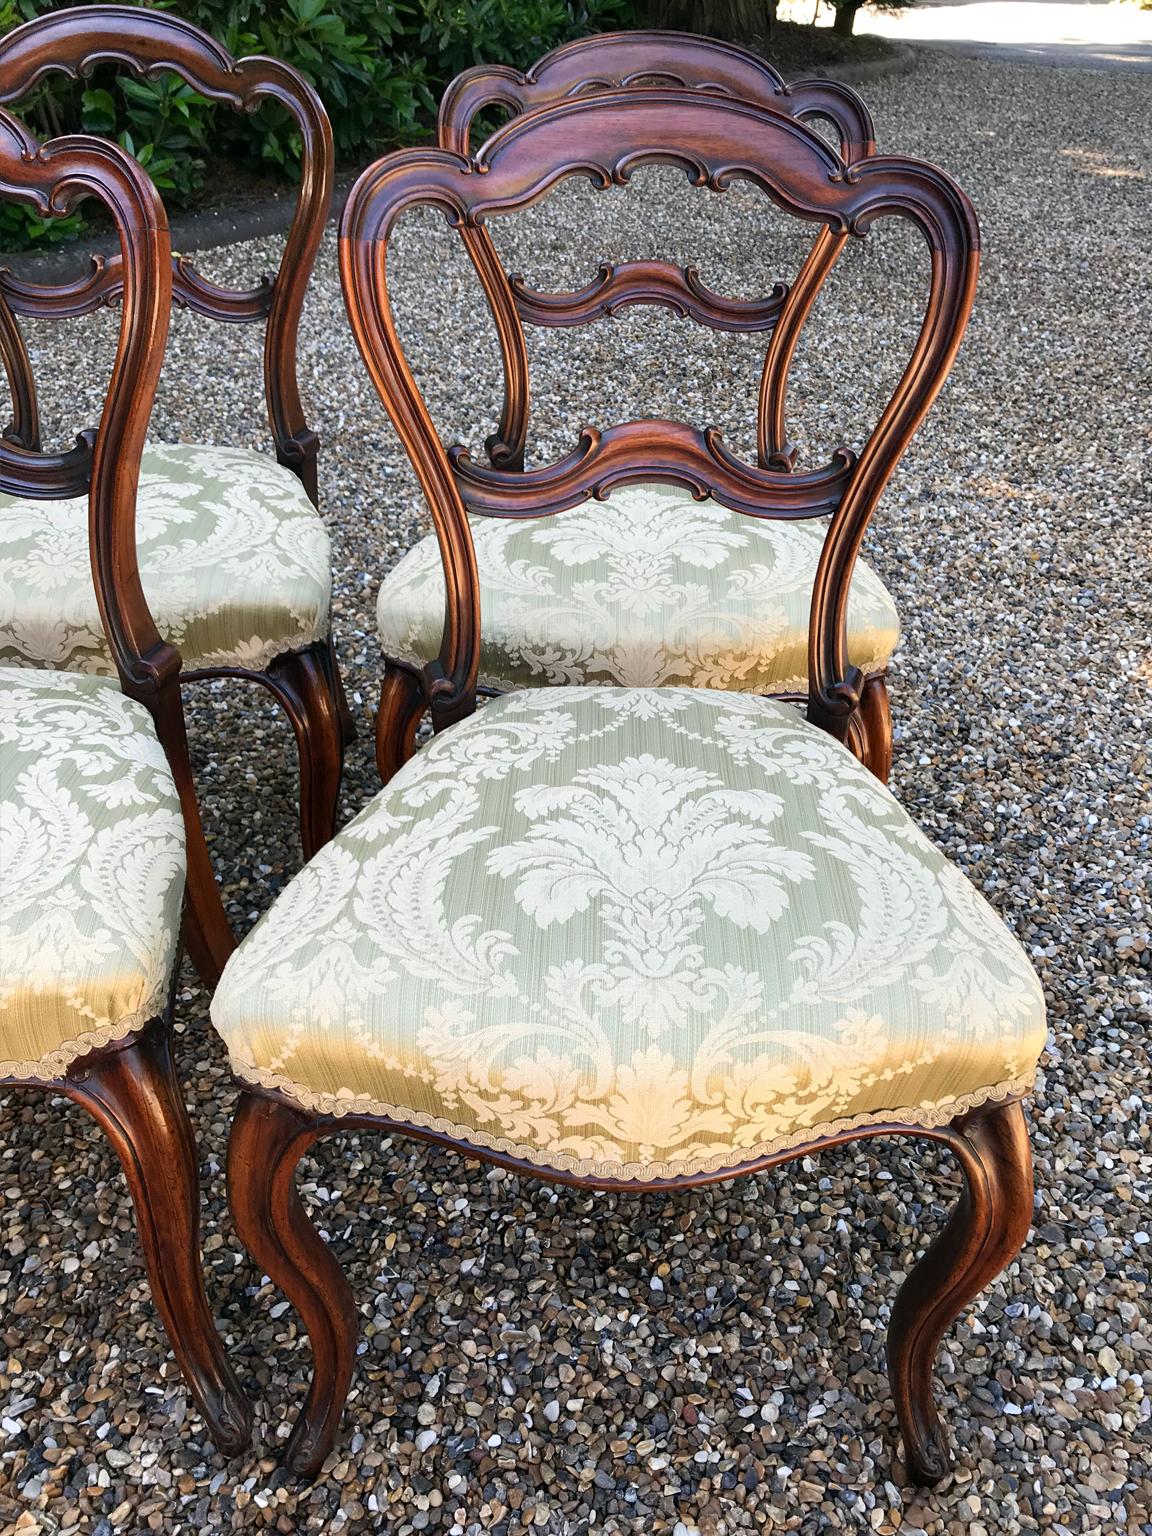 Set of 6 Victorian Rosewood Spoon Back Dining Chairs In Good Condition For Sale In Richmond, London, Surrey